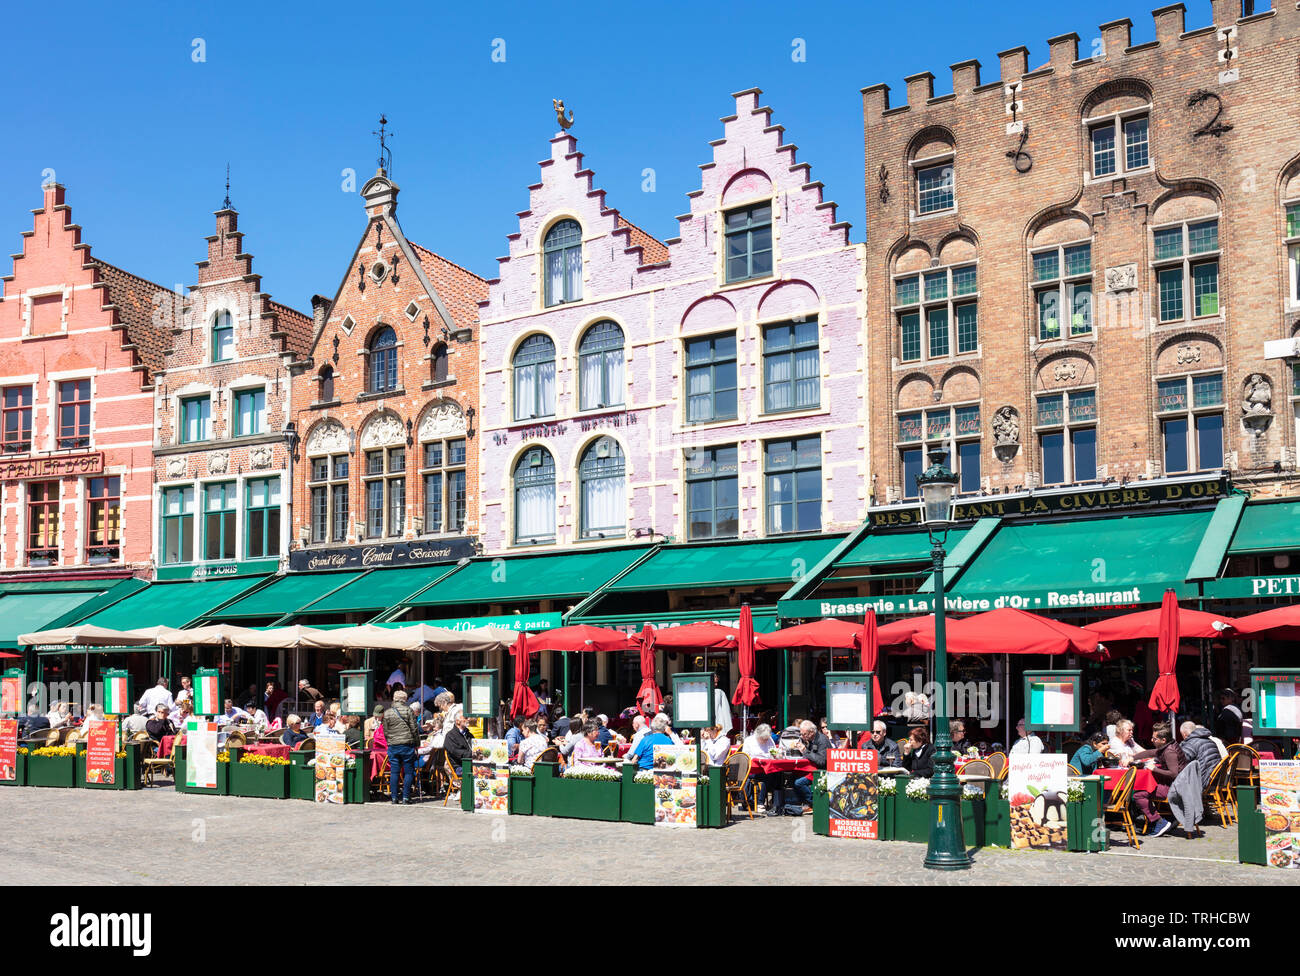 Old buildings now cafes and restaurants with ornate gables in the Historic square the Markt in the centre of Bruges Belgium West Flanders EU Europe Stock Photo